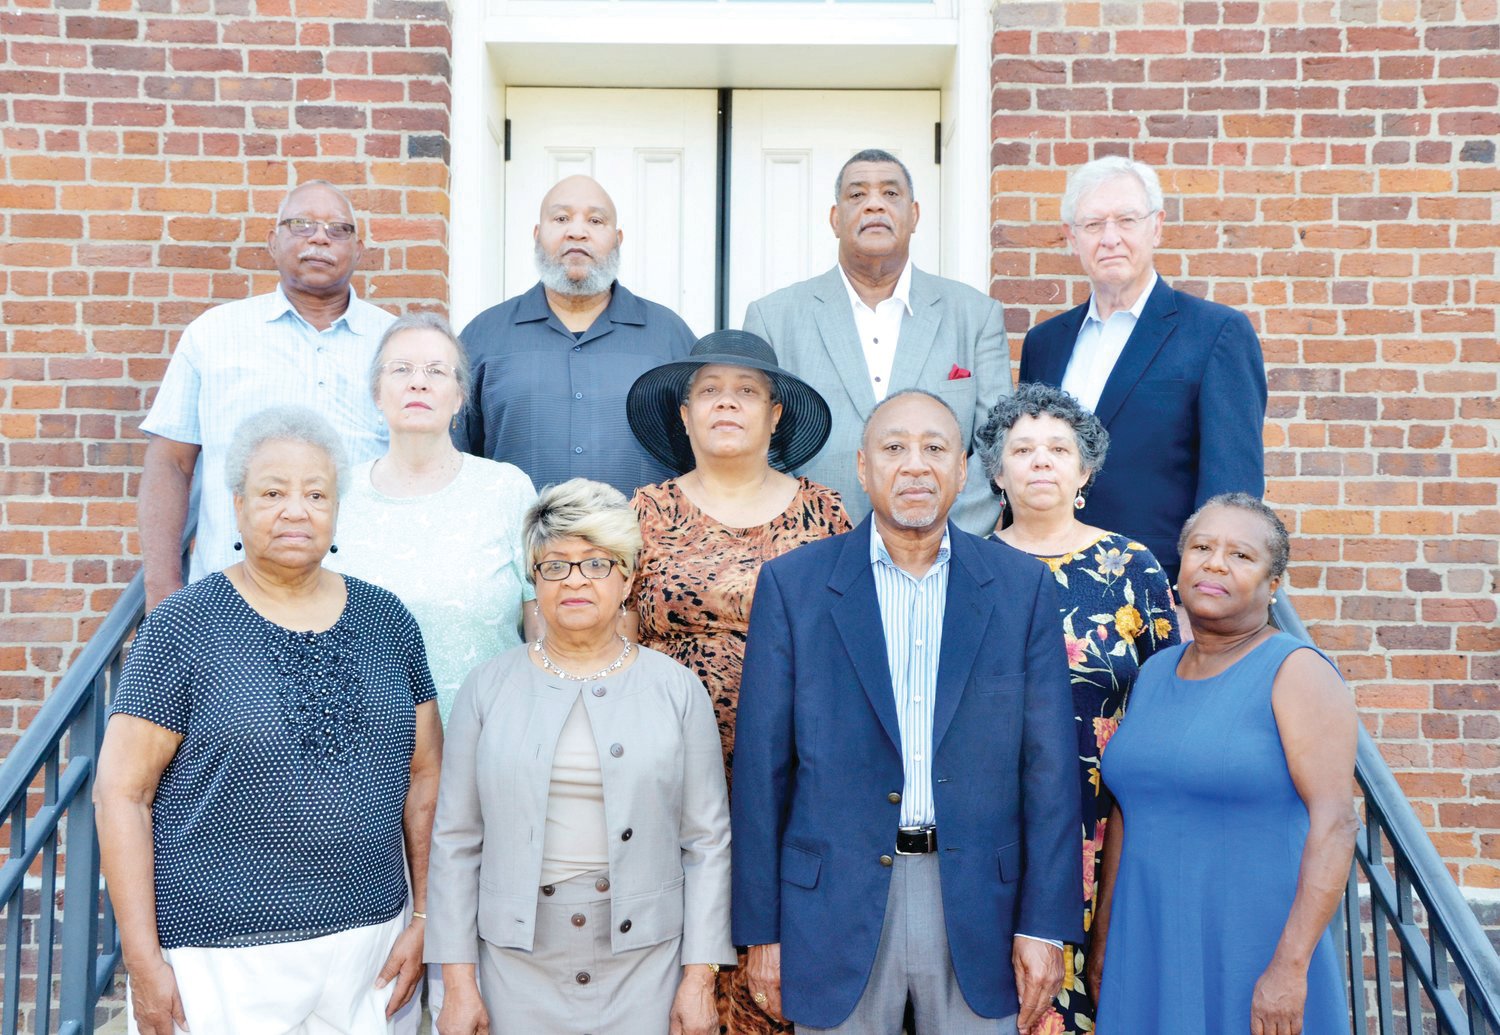 This group was involved in the creation of the Community Remembrance Coalition. Front row, from left: Armentha Davis, Mary Harris, Larry Brooks and Mary Nettles. Middle row, from left: Vickie Shea, Cledia Holland and Linda Batley. Back row, from left: Glenn Fox, Wayne Holland, Carl Thompson and Bob Pearson. Pearson, a retired attorney and diplomat who lives in Fearrington Village, was responsible for getting the effort started.